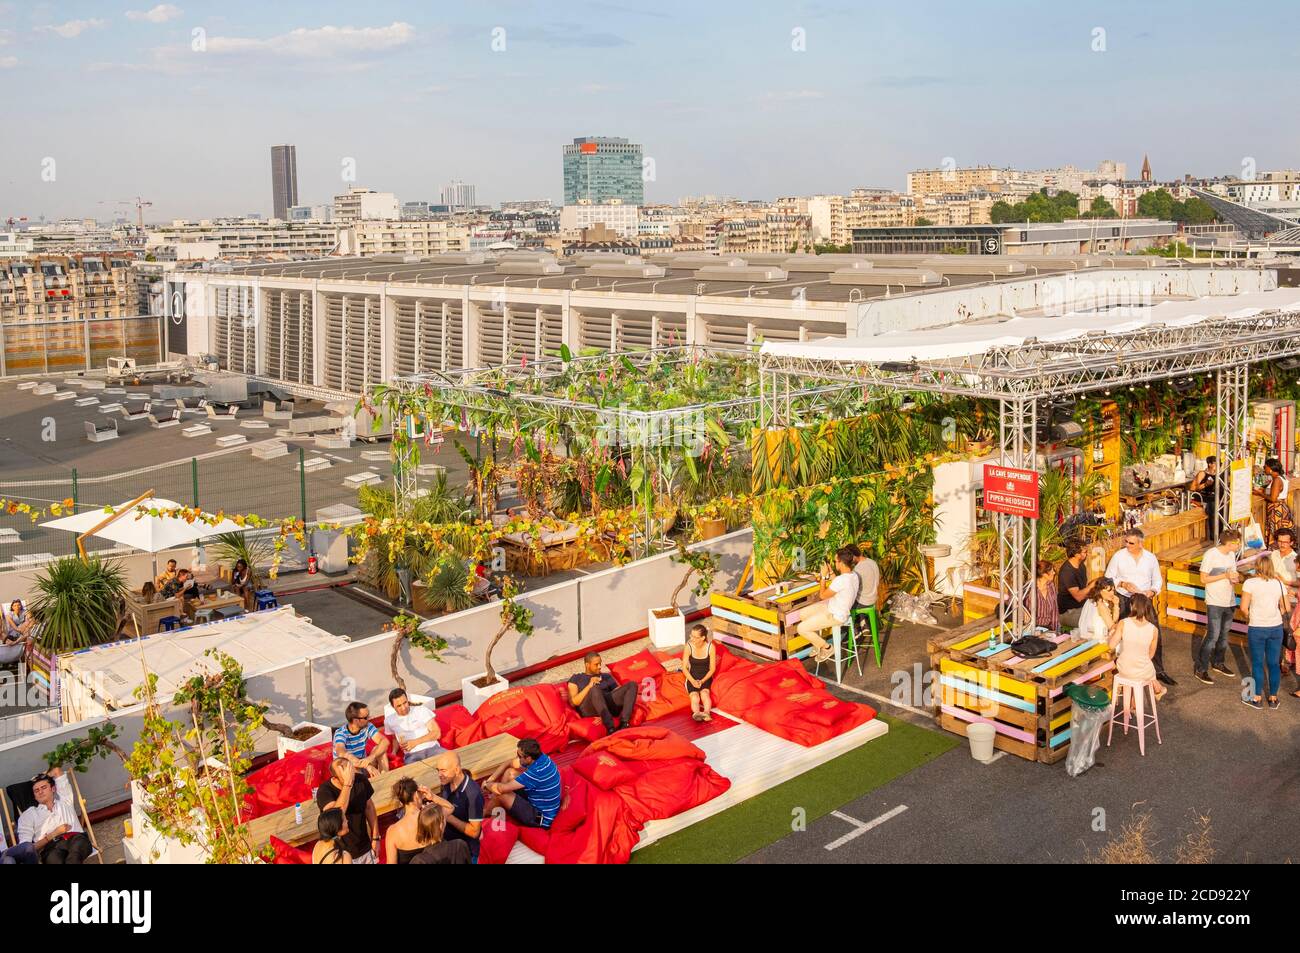 France, Paris, vegetal rooftop of 3,500M2, the Hanging garden installed on the roof of a parking lot during the summer Stock Photo